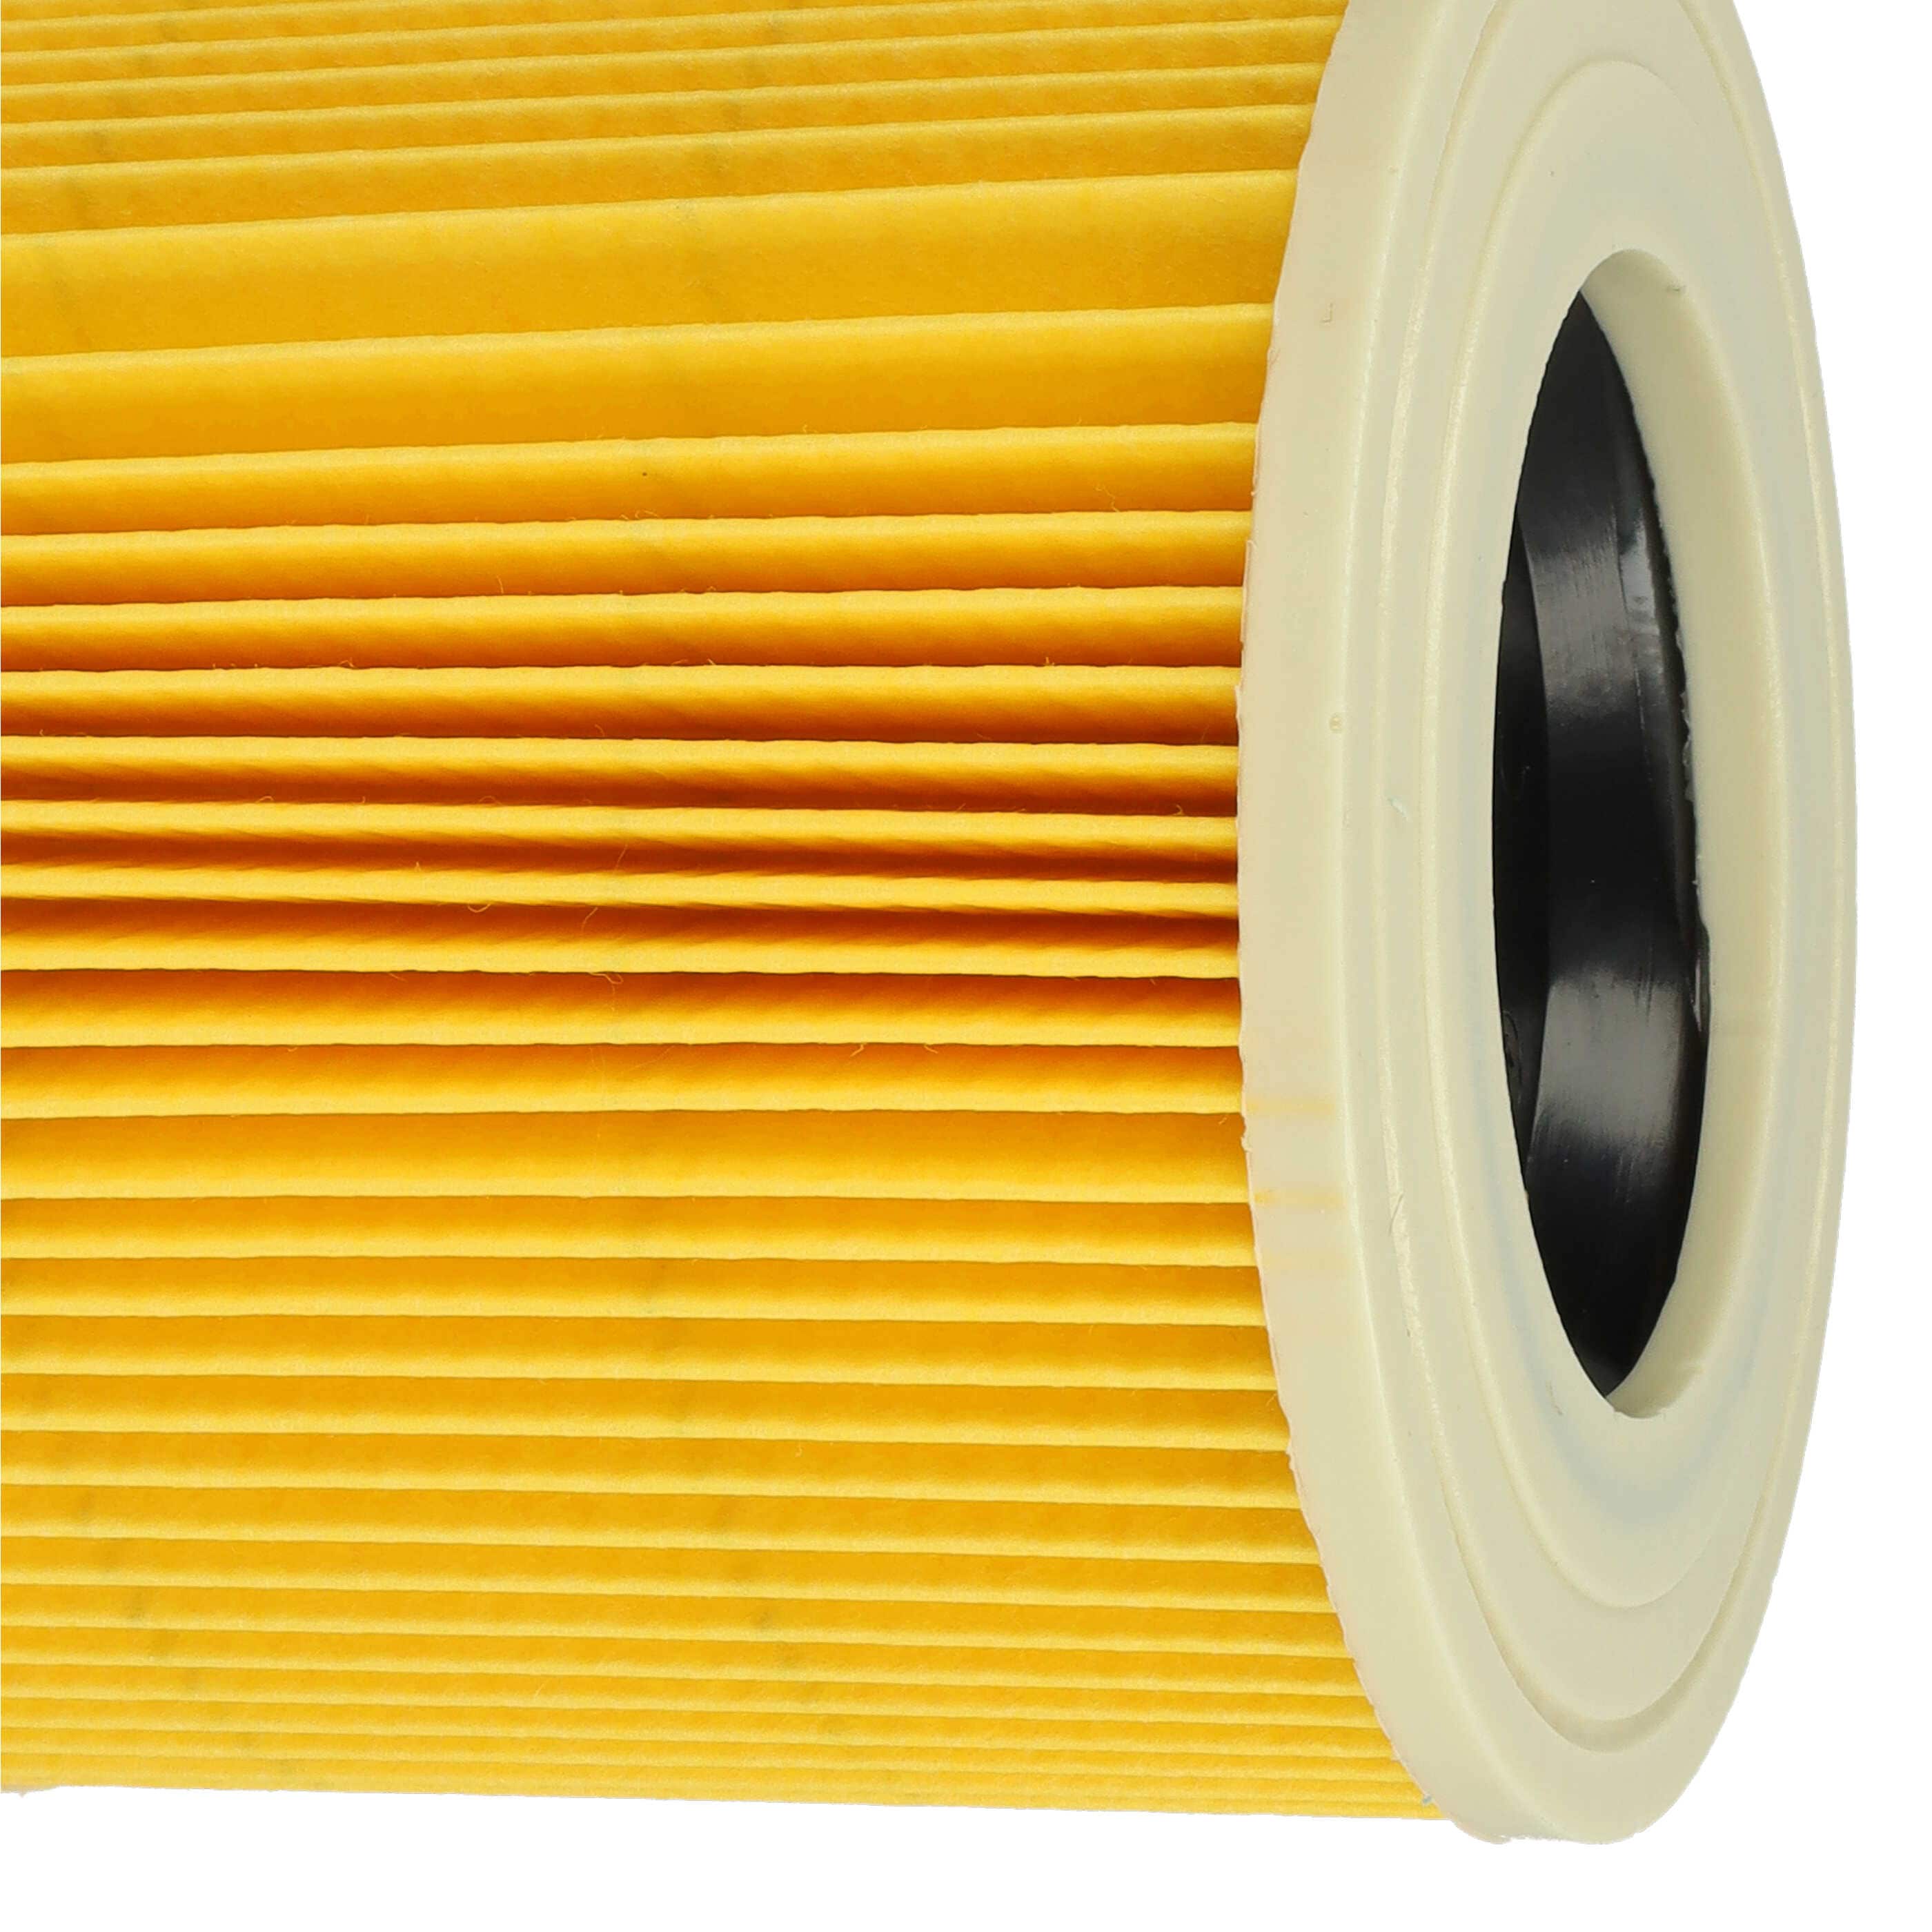 3x cartridge filter replaces Kärcher 2.863-303.0, 6.414-552.0, 6.414-547.0 for BaierVacuum Cleaner, yellow